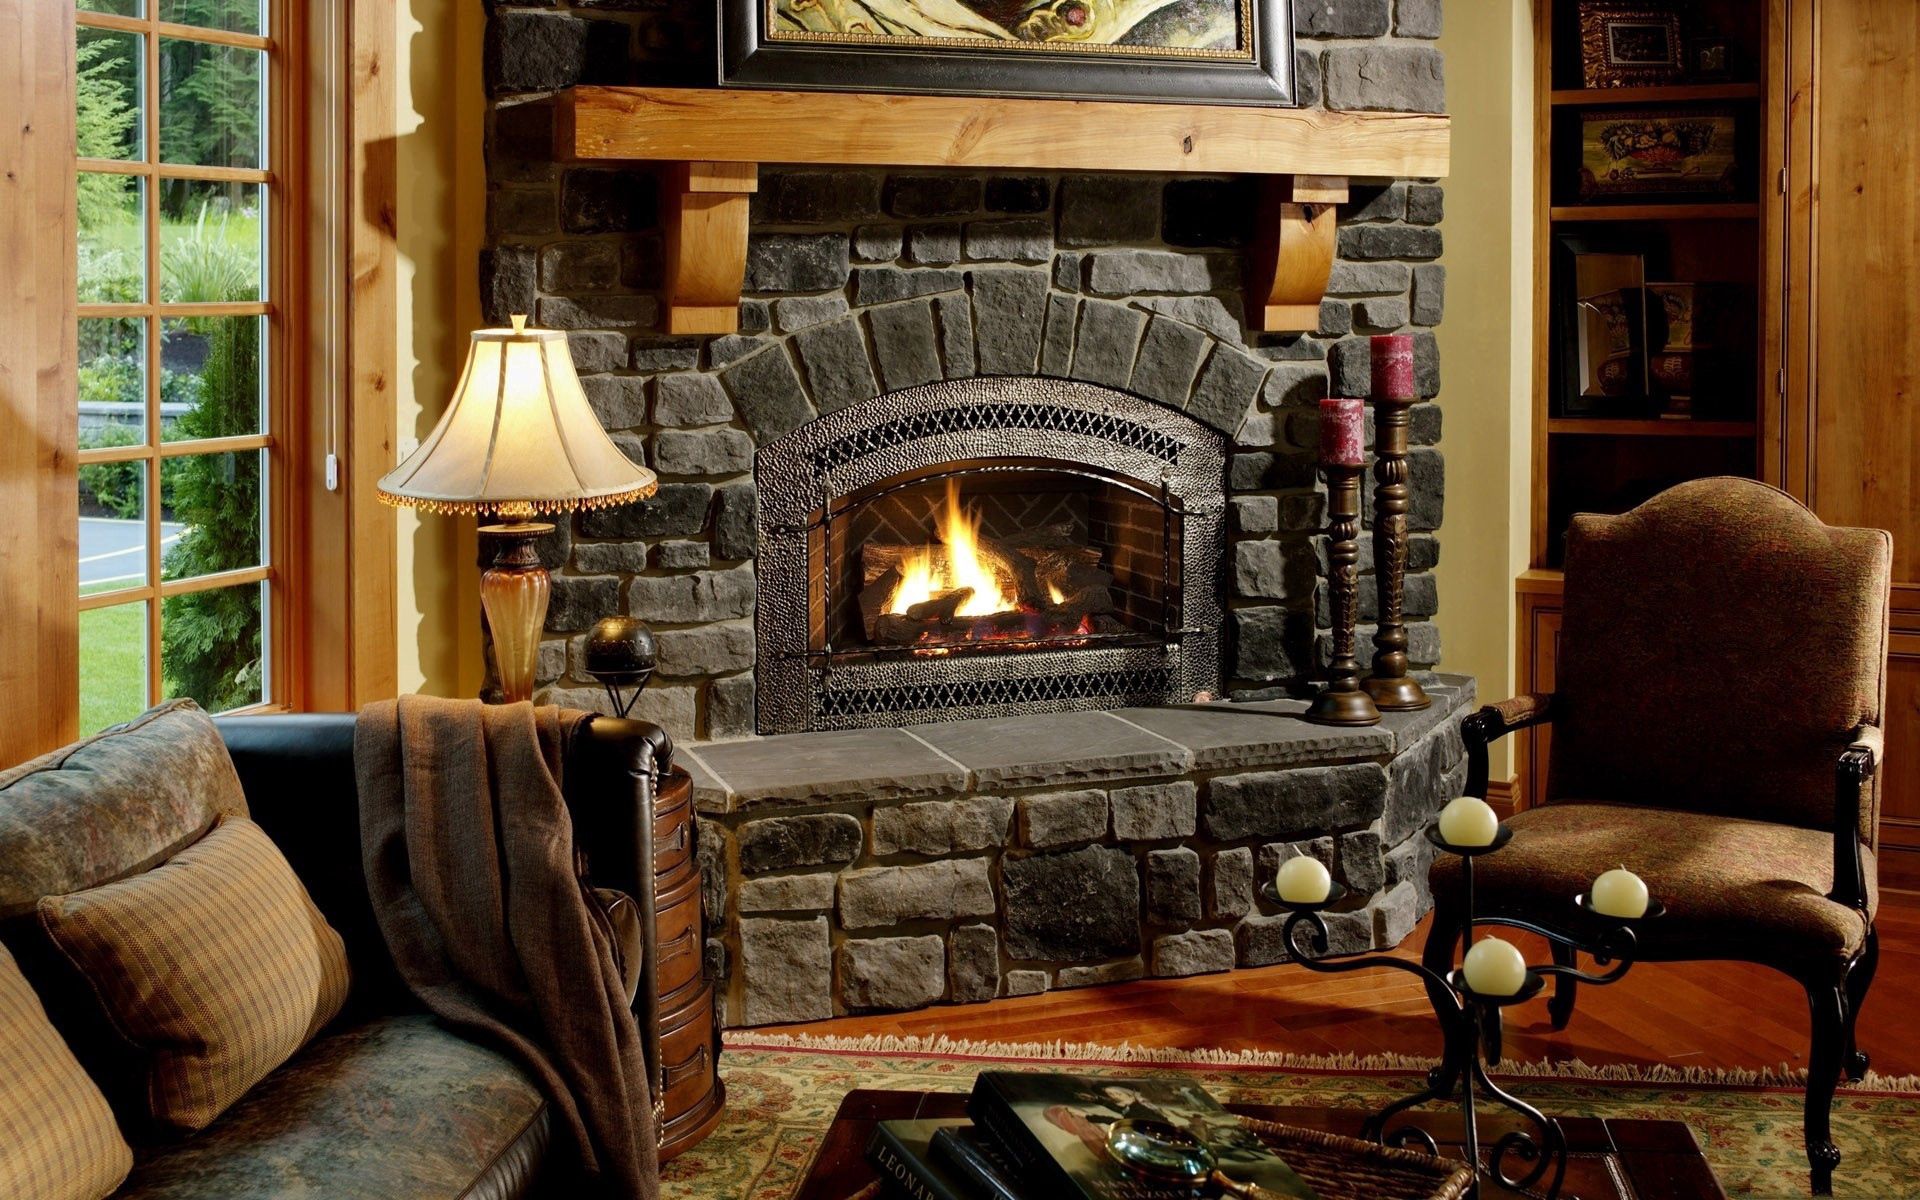 Popular Fireplace Image for Phone